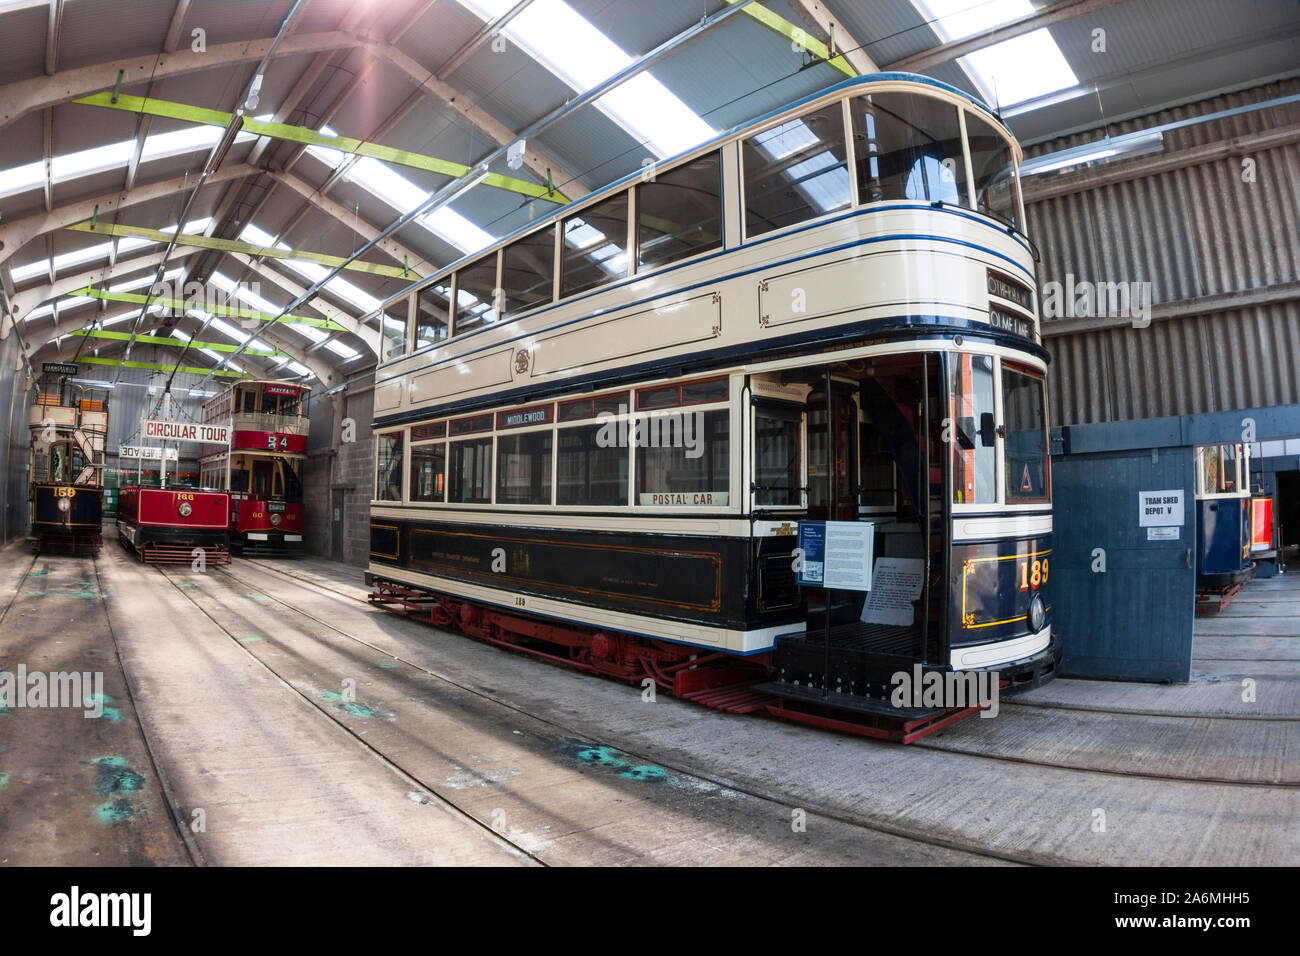 Tram Shed Depot, The National Tramway Museum at Crich Tramway Village, Crich, Derbyshire Stock Photo